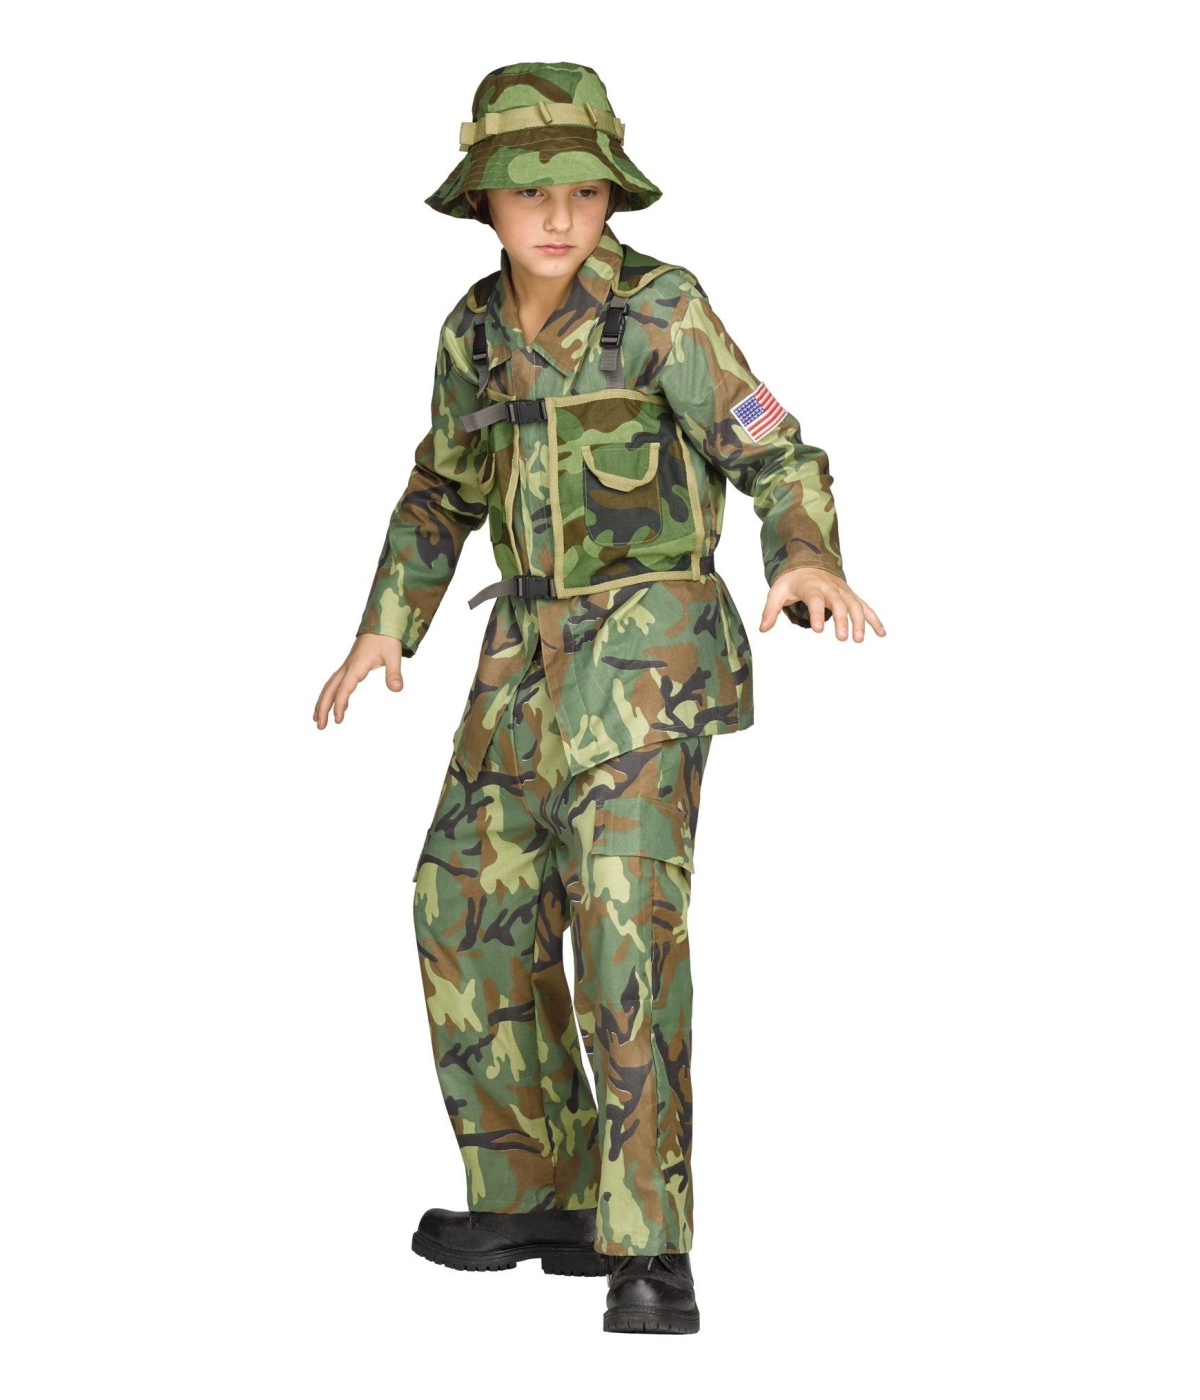 Authentic Special Forces Boys Costume